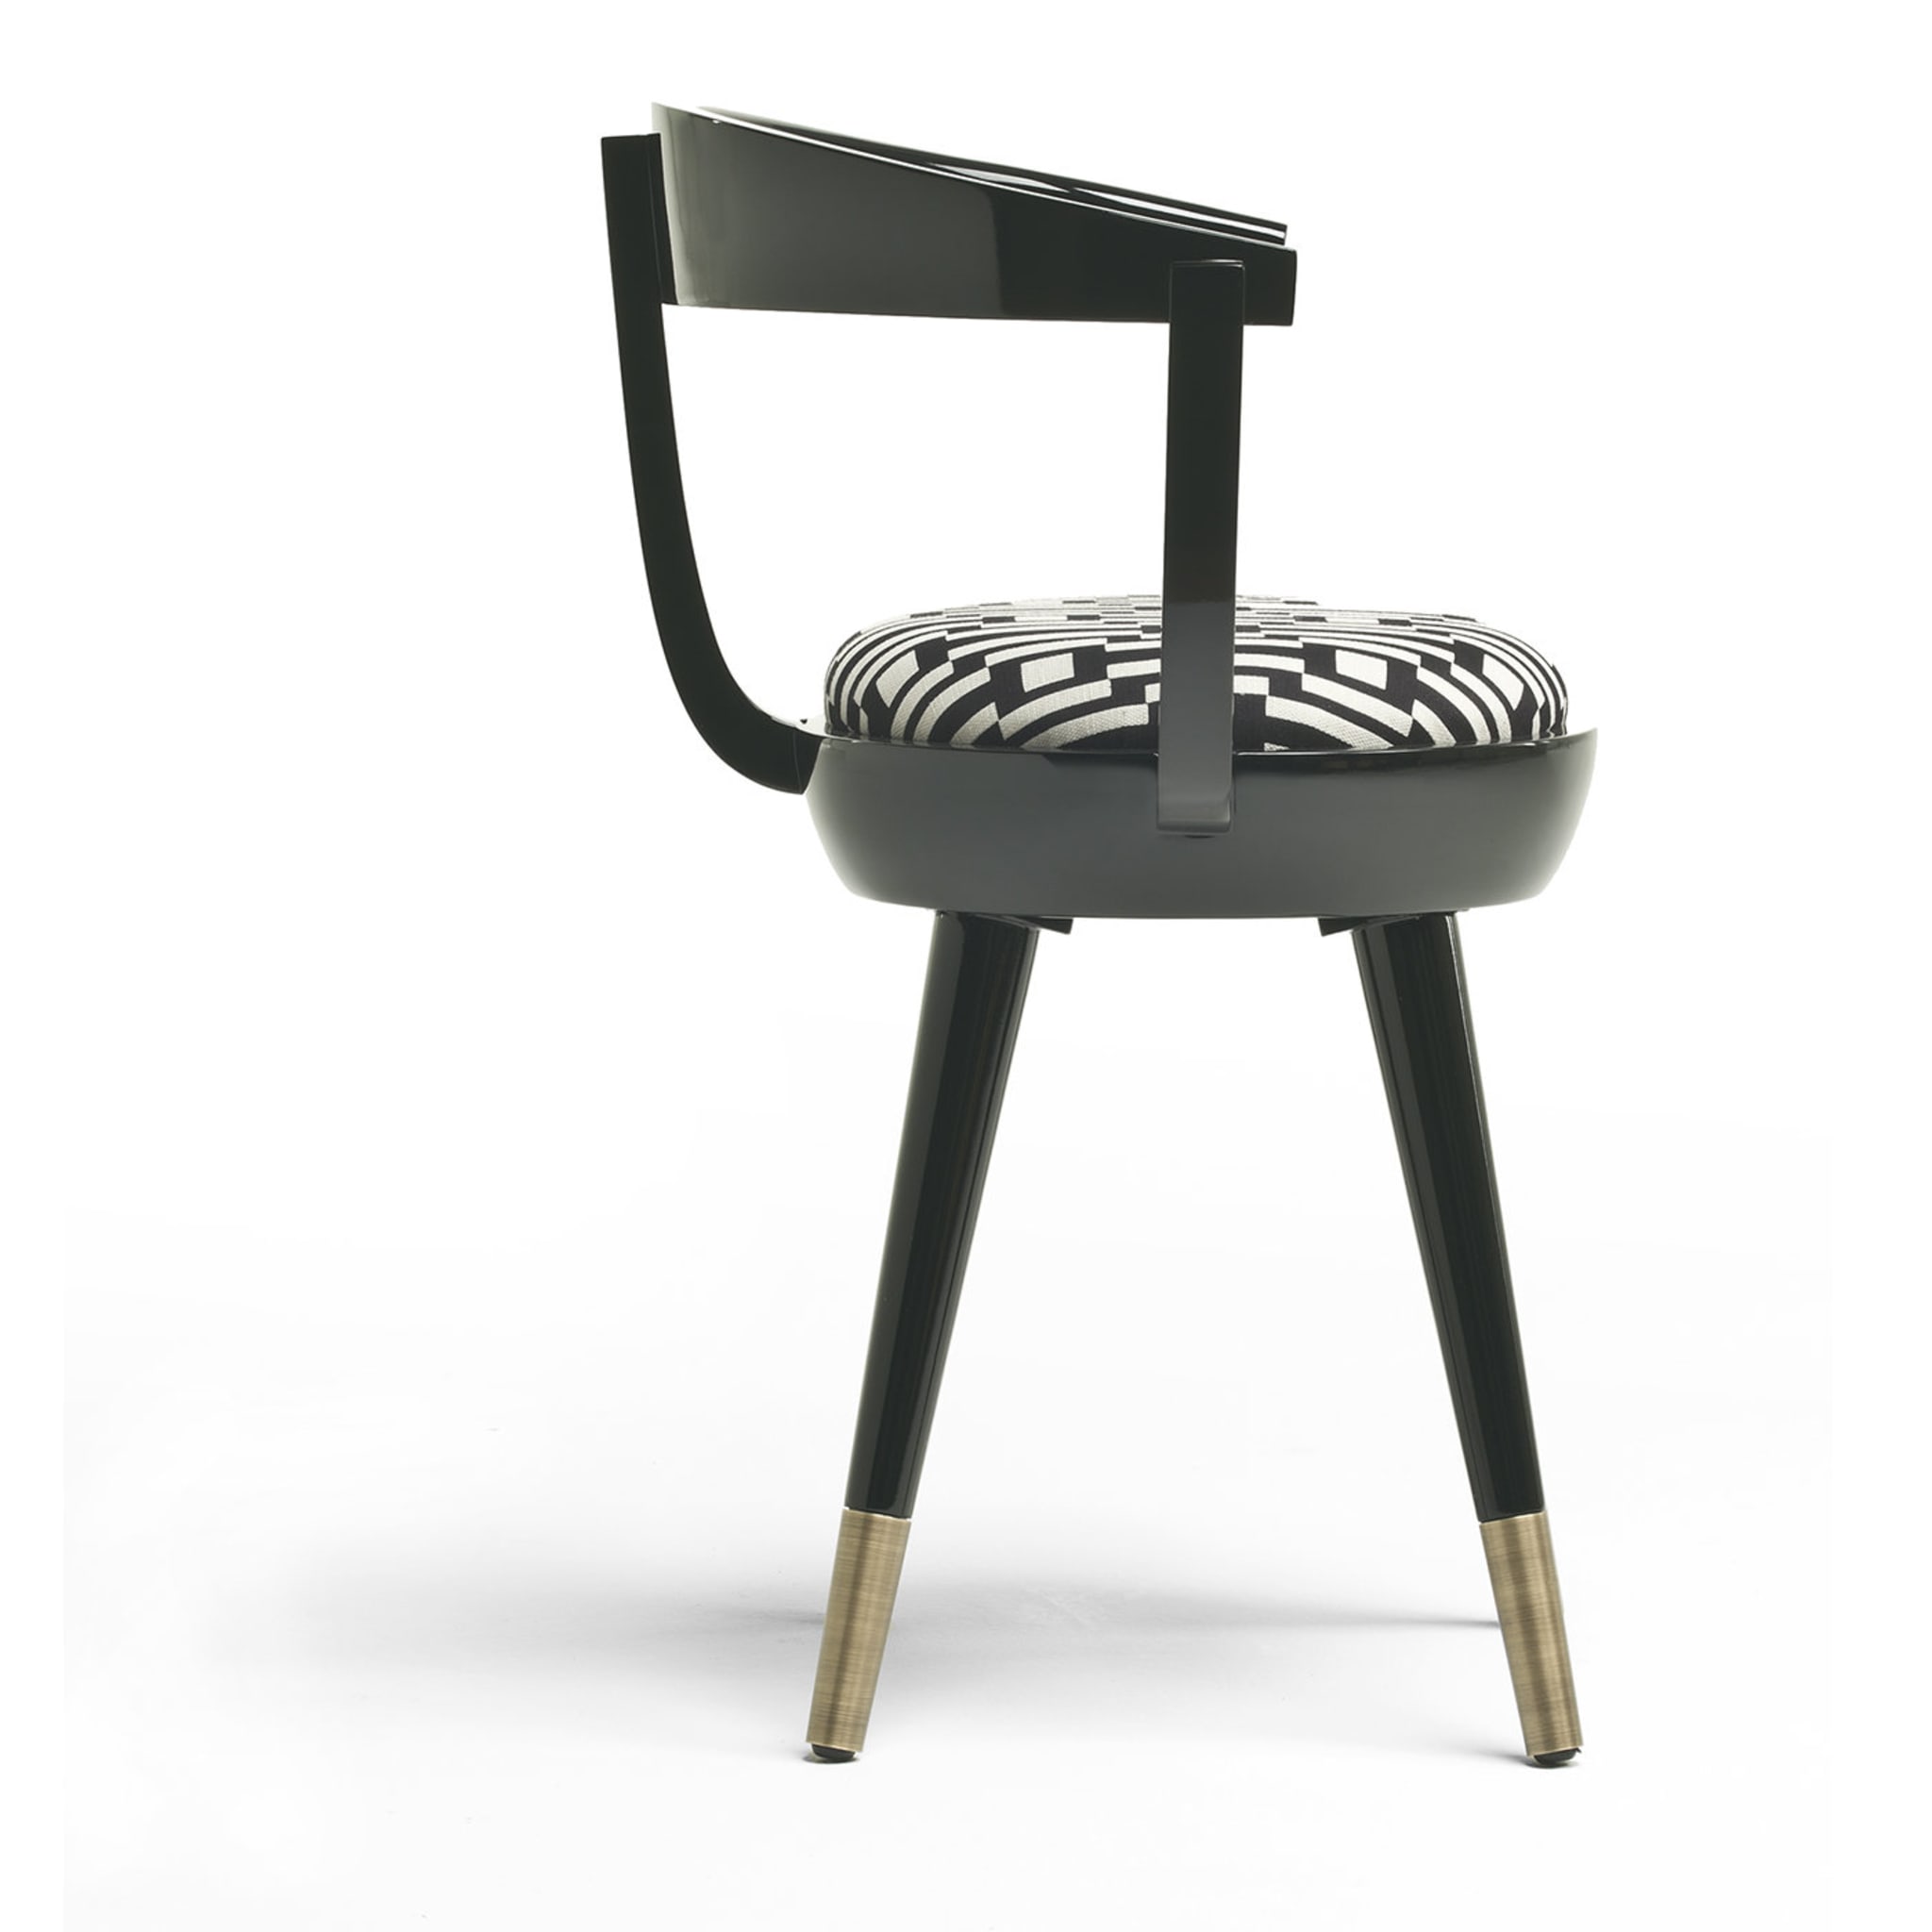 Galleon Dining Chair by Archer Humphryes Architects - Alternative view 1